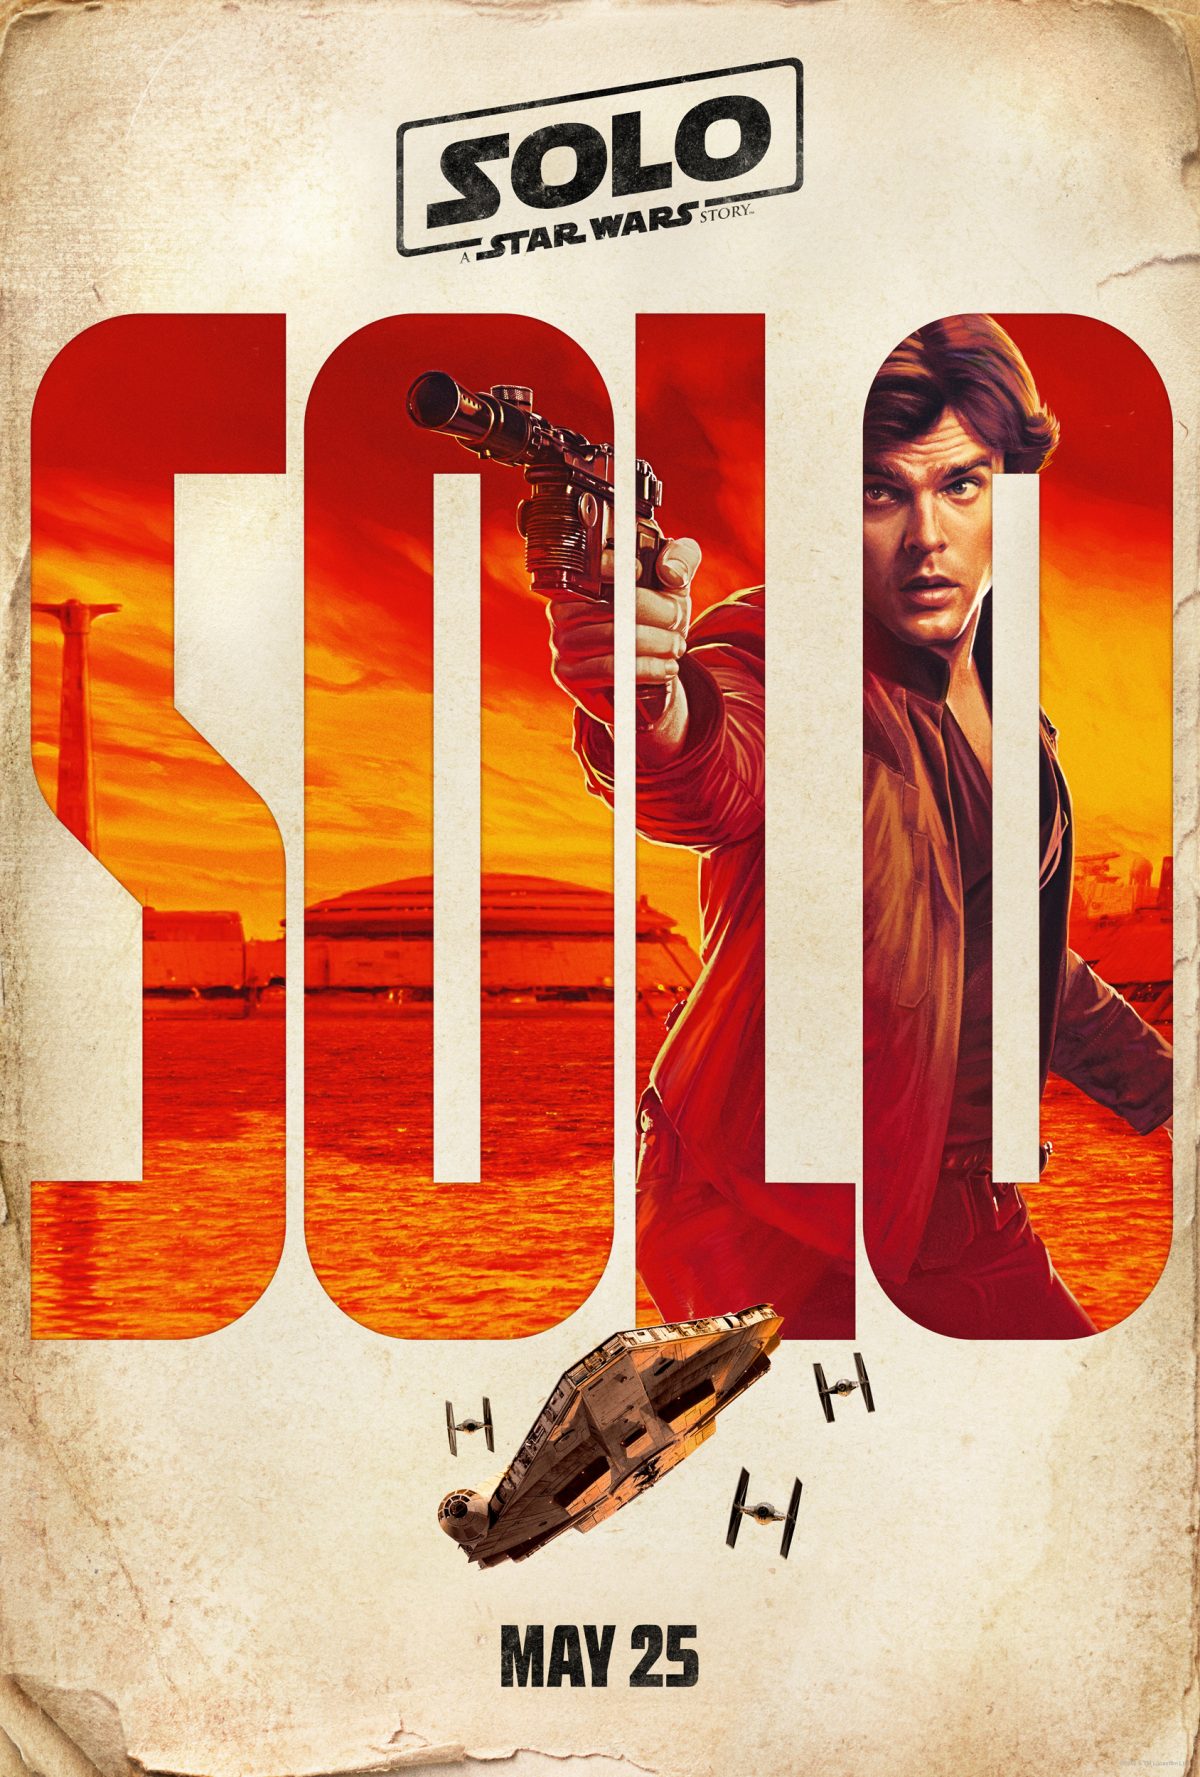 Solo: A Star Wars Story New Trailer and Character Posters #HanSolo